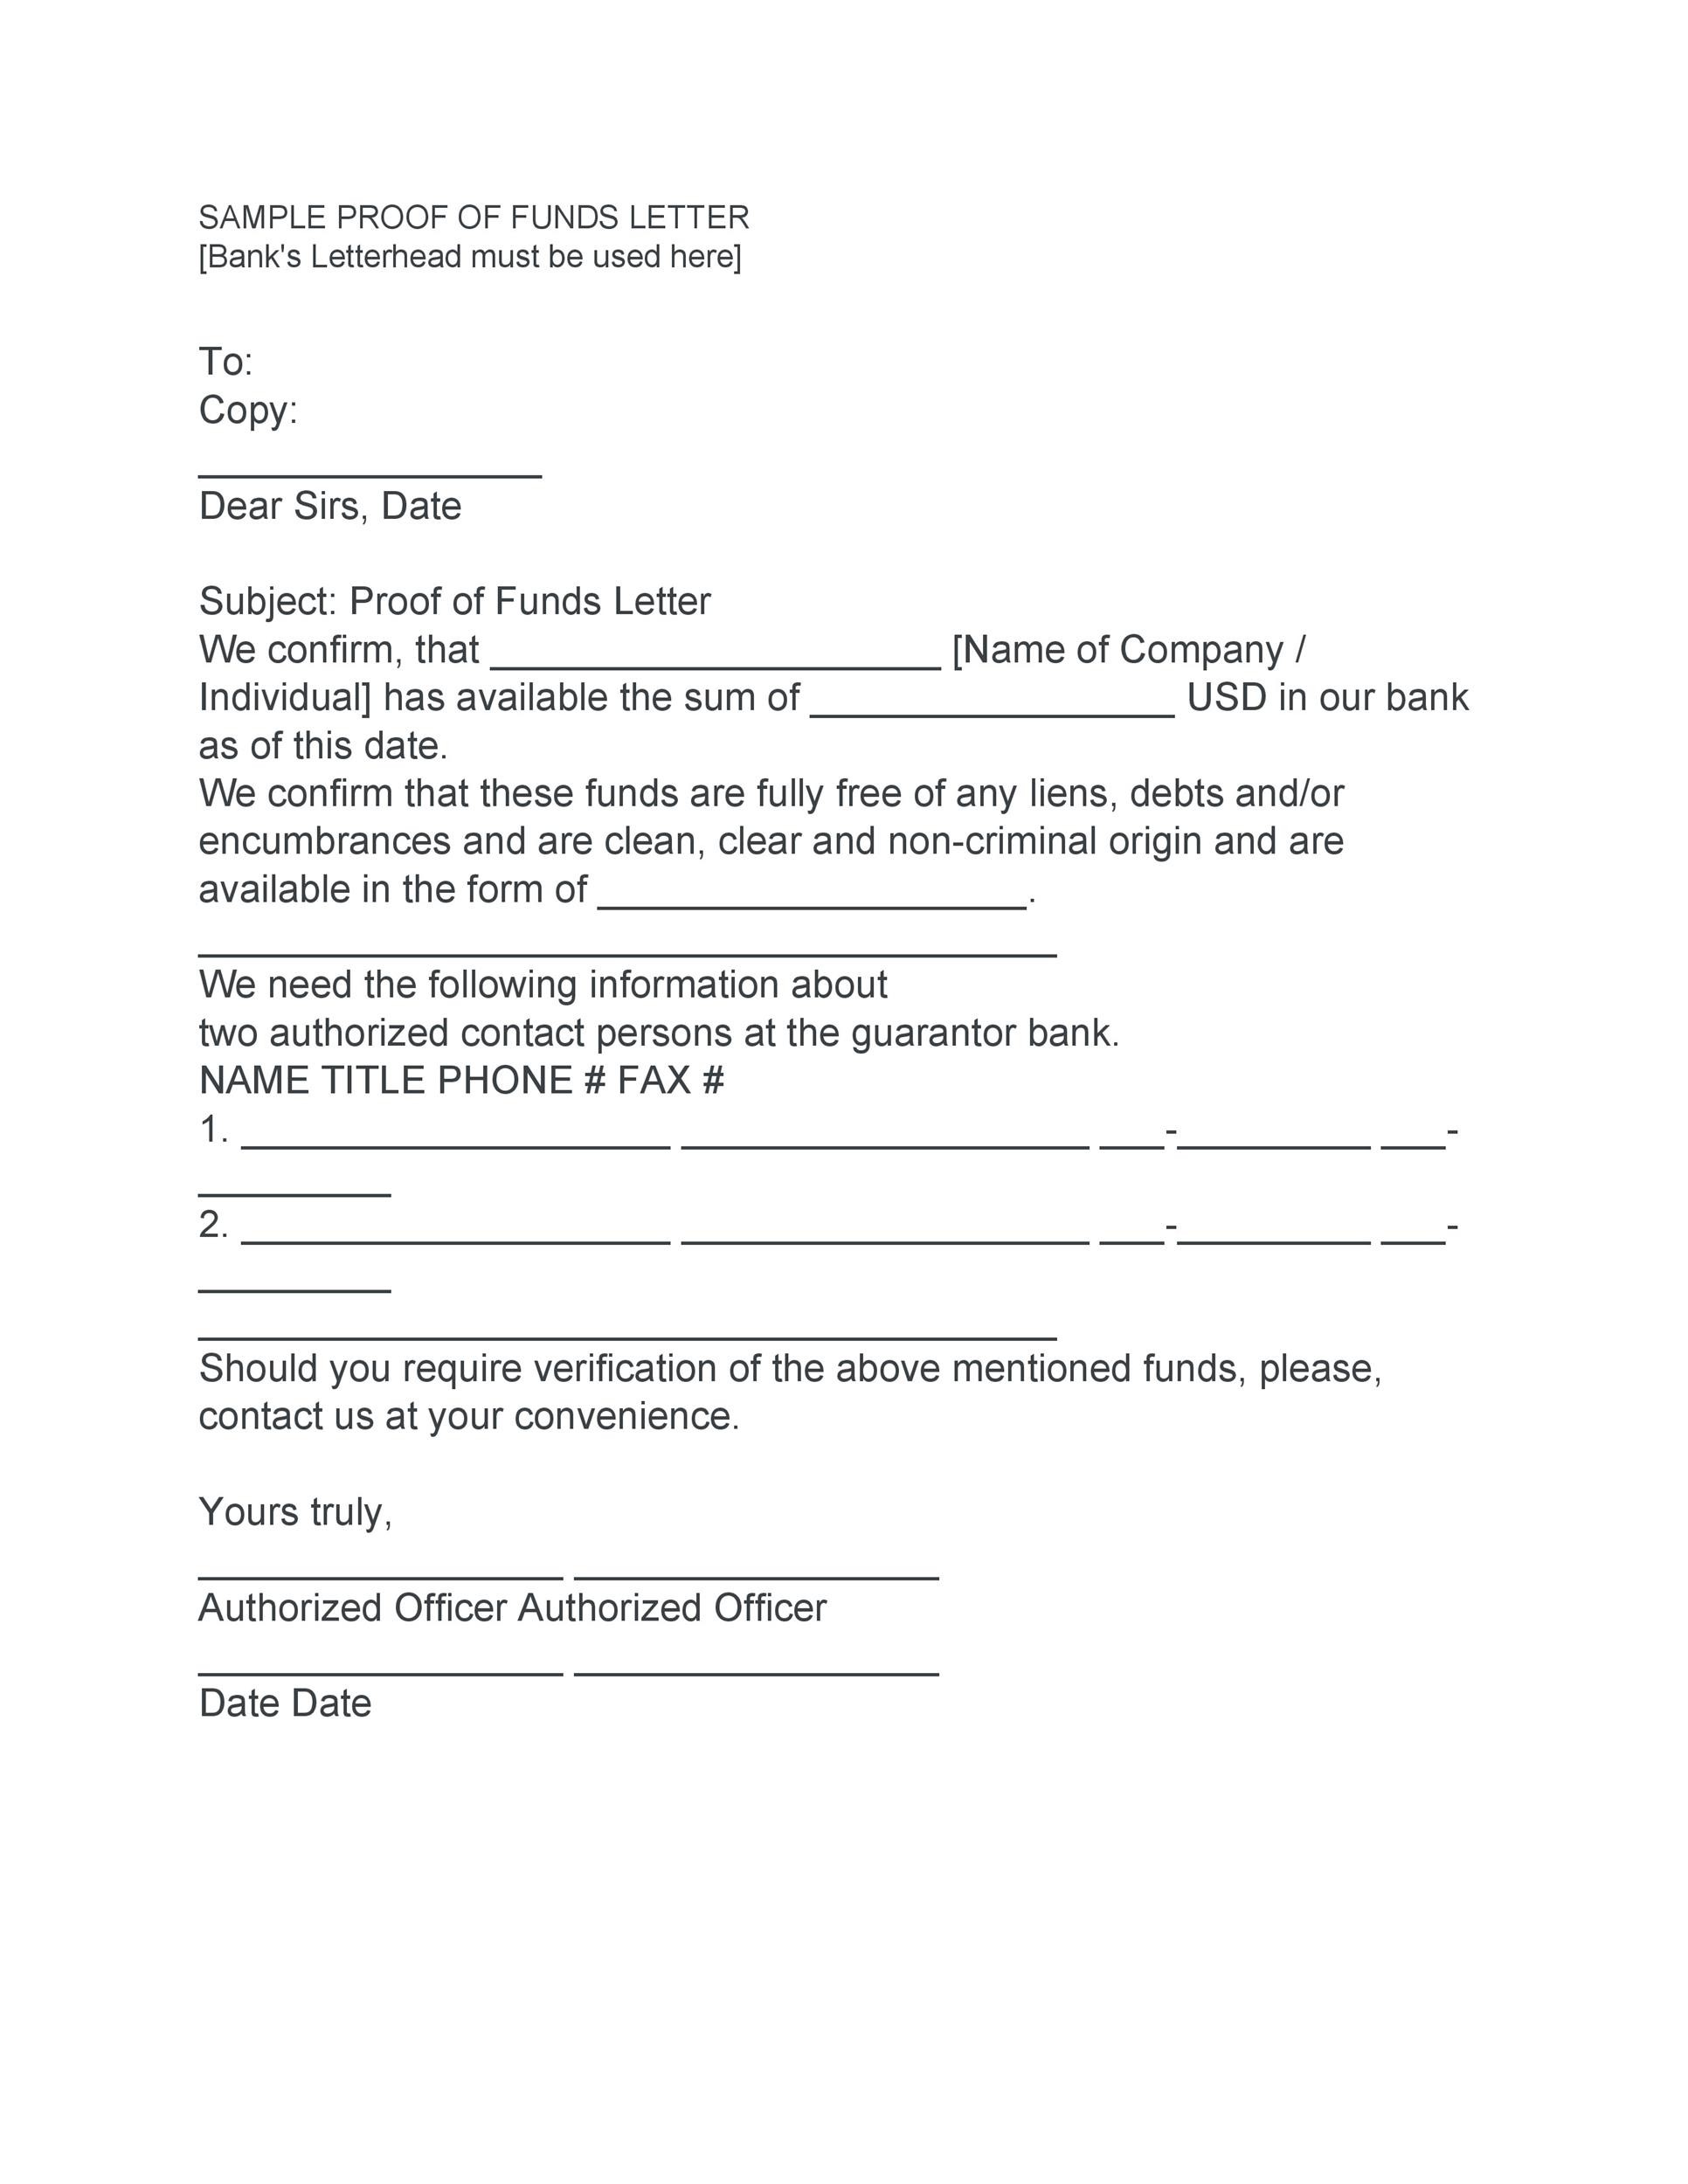 25-best-proof-of-funds-letter-templates-templatelab